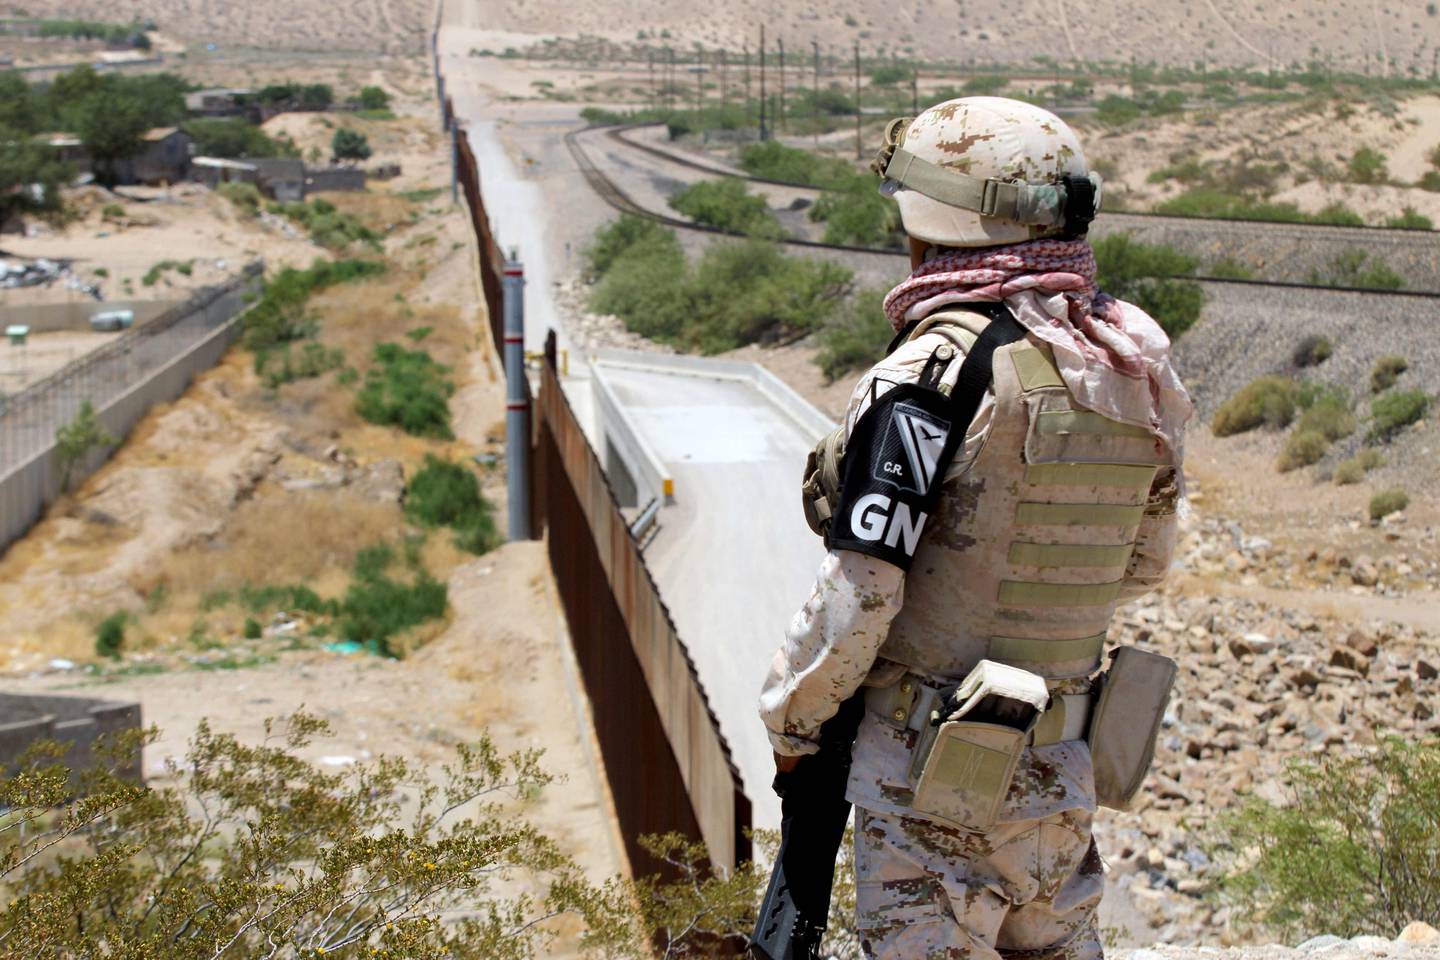 A member of Mexican National Guard watches the border with the US at the Anapra area in Ciudad Juarez, State of Chihuahua, Mexico, on June 26, 2019. - Mexico's president vowed Tuesday to investigate the controversial detention of migrants trying to cross the US border, saying the 15,000 troops he has deployed there have no such orders. (Photo by HERIKA MARTINEZ / AFP)